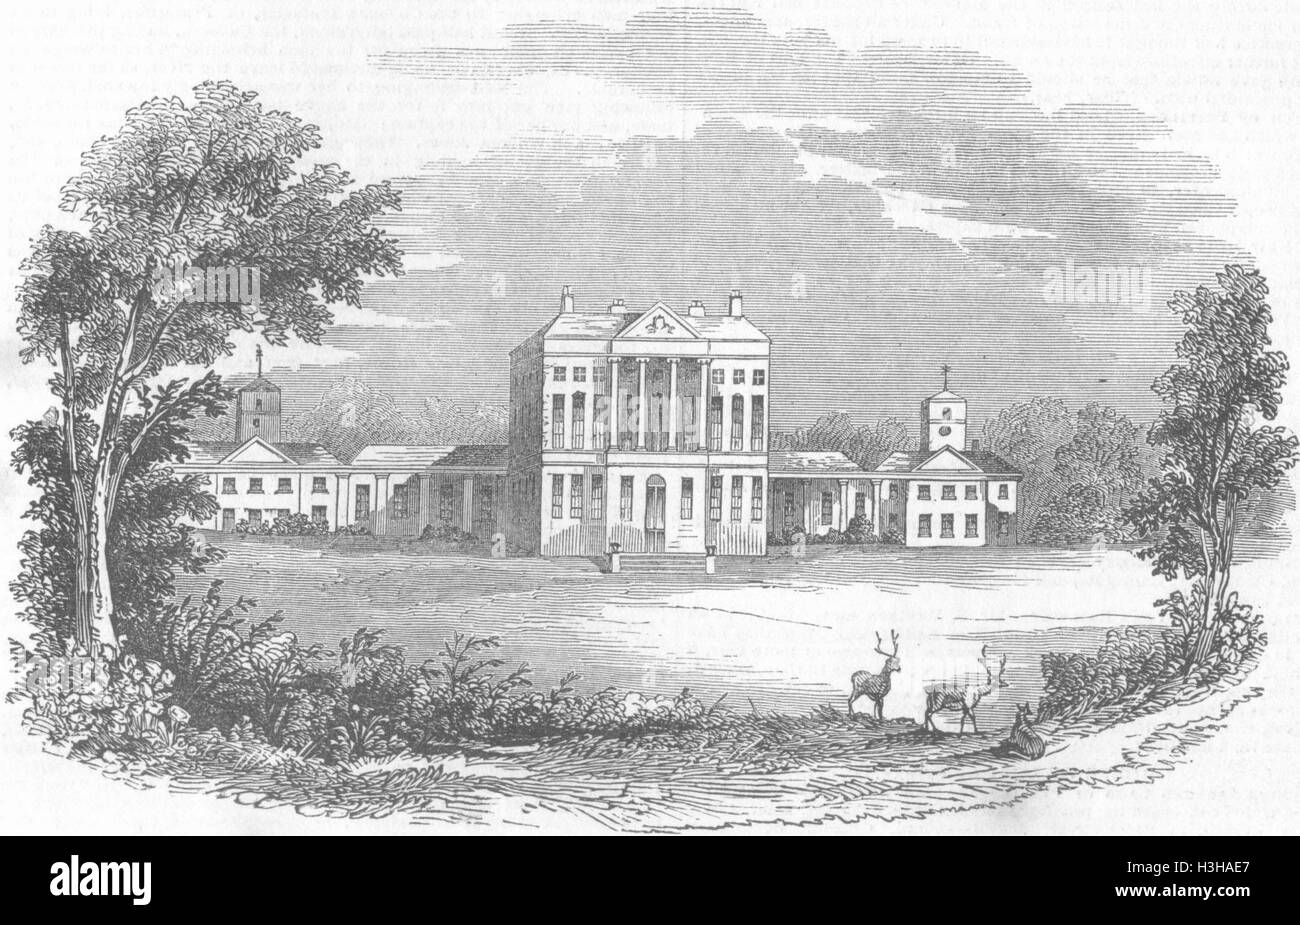 NORTHUMBS Howick Hall 1845. Illustrated London News Banque D'Images